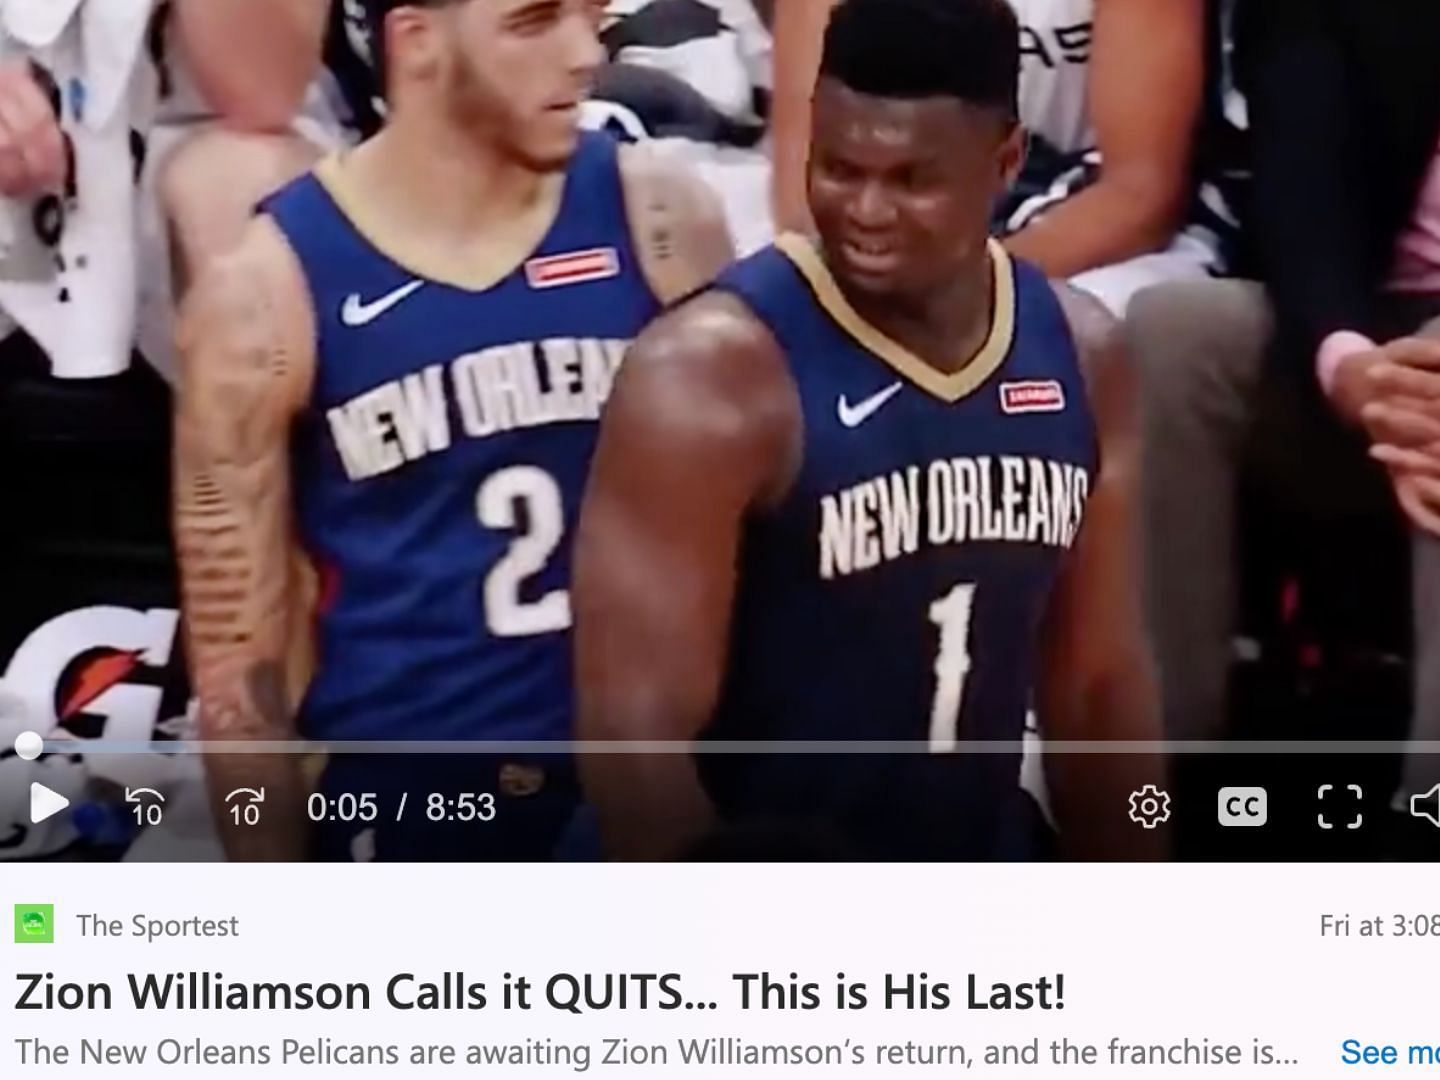 Snippet of the viral video suggesting Zion Williamson is quitting the NBA